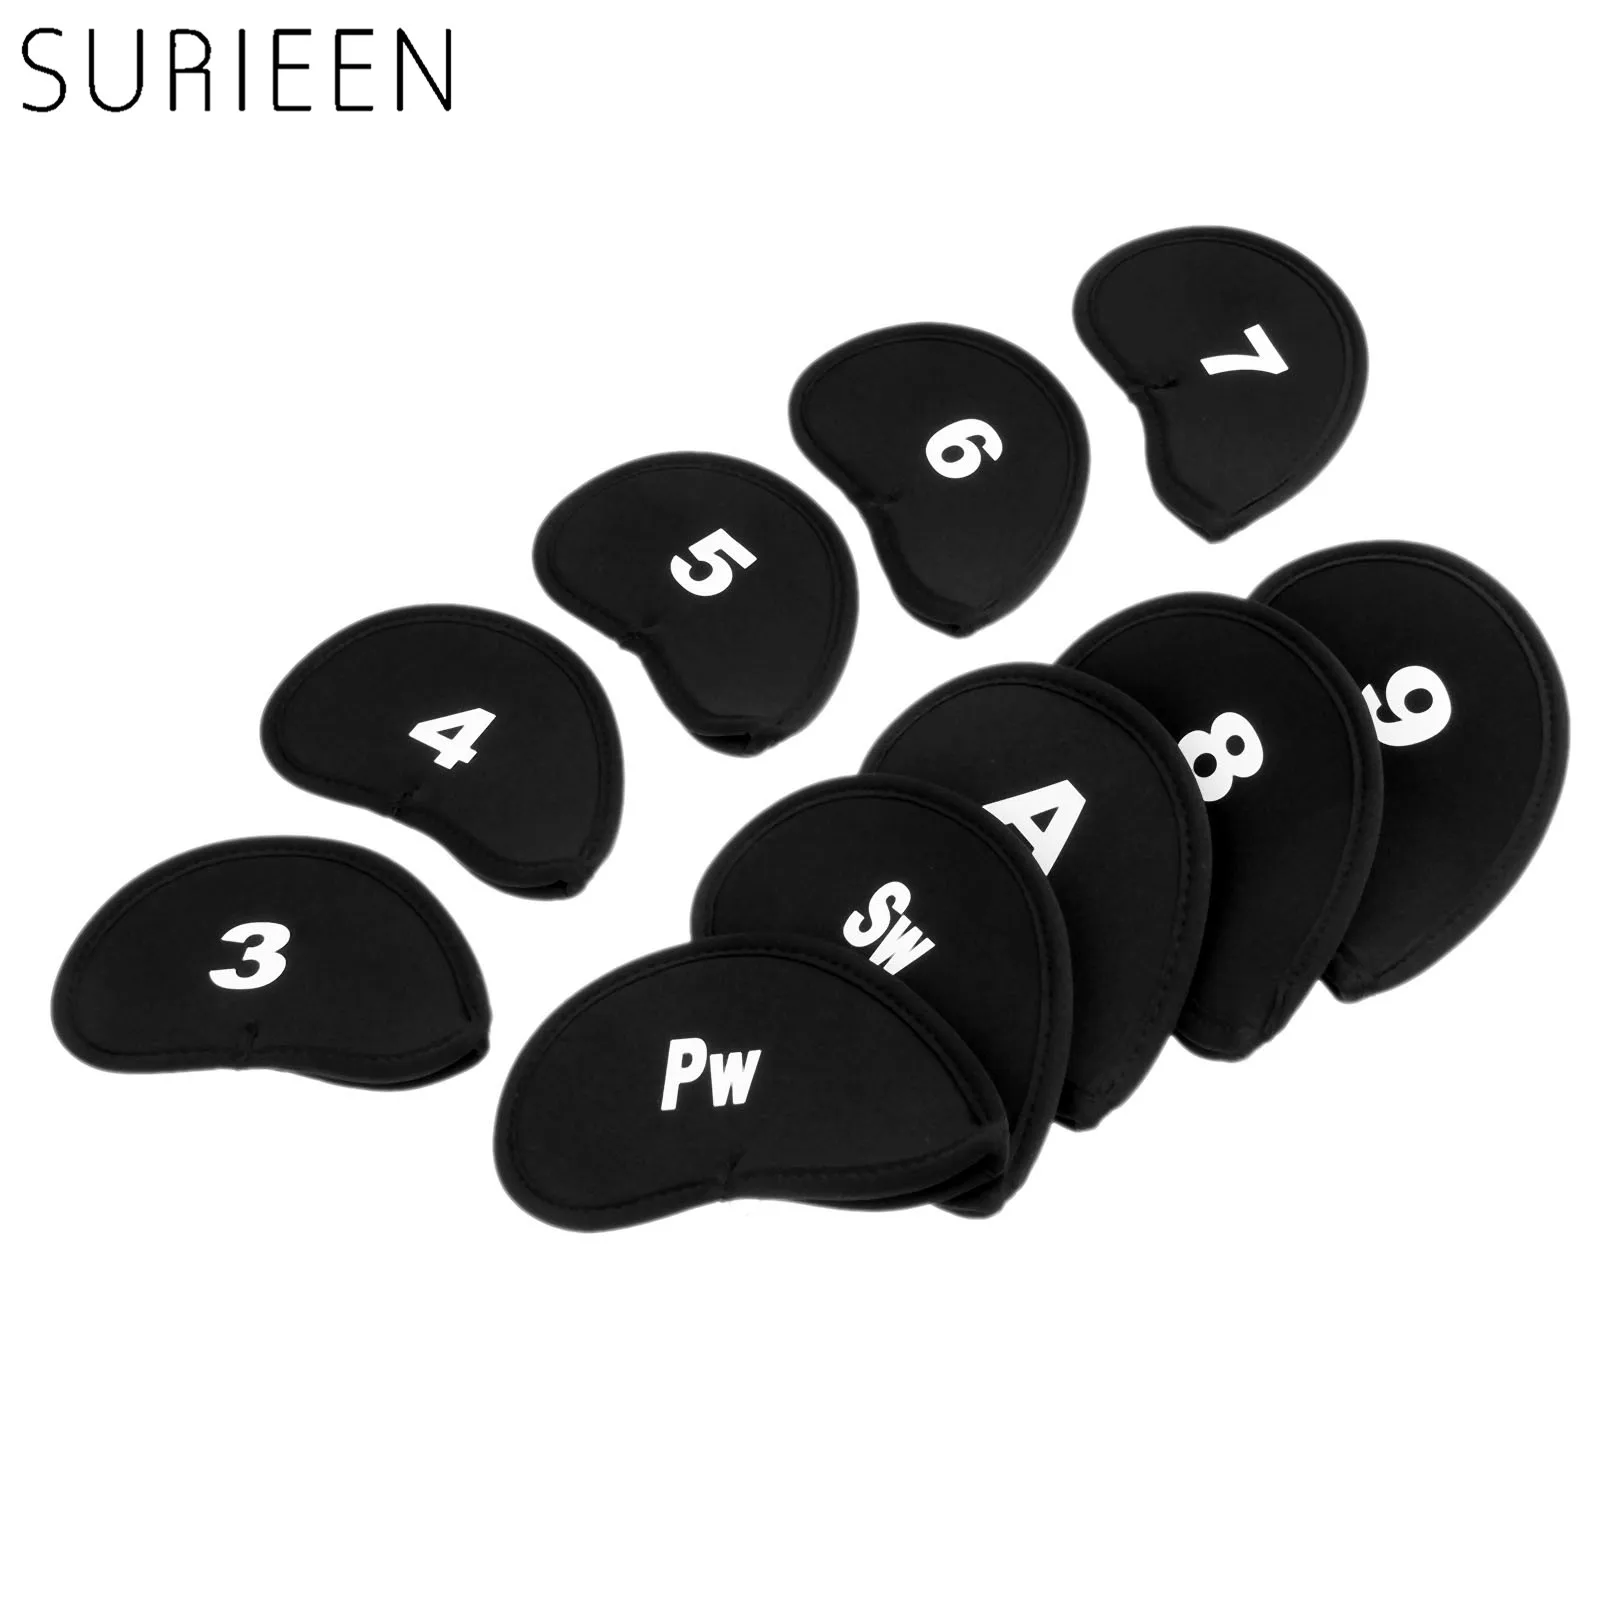 

Golf Club Iron Head Covers 10pcs Golf Headcovers Golf Club Iron Putter Head Protector Set Neoprene Protective Cover With Numbers